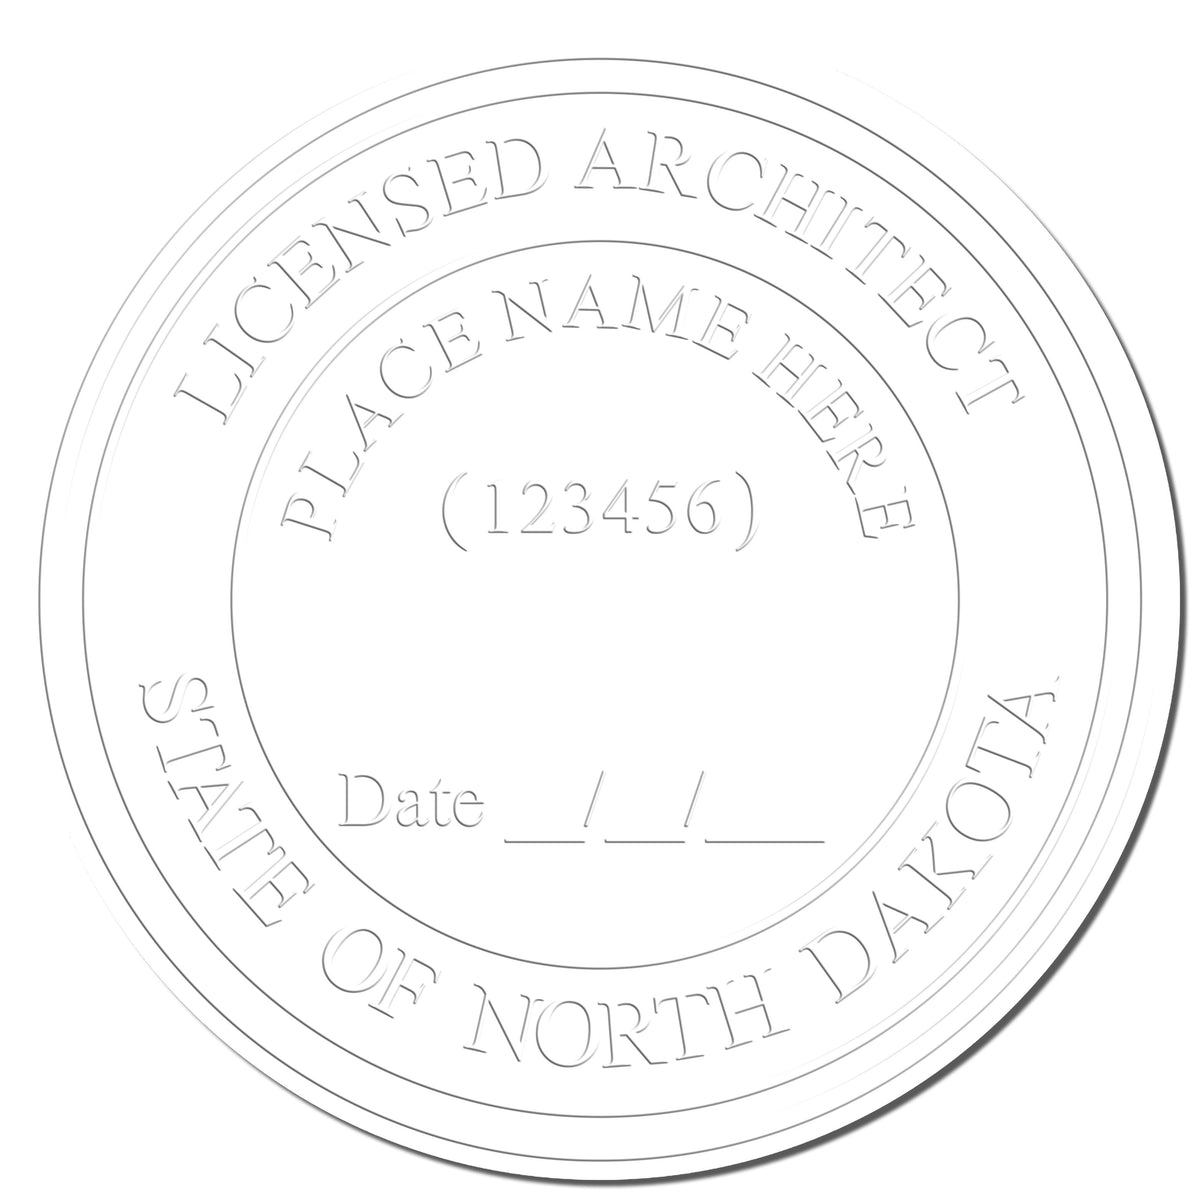 This paper is stamped with a sample imprint of the Gift North Dakota Architect Seal, signifying its quality and reliability.